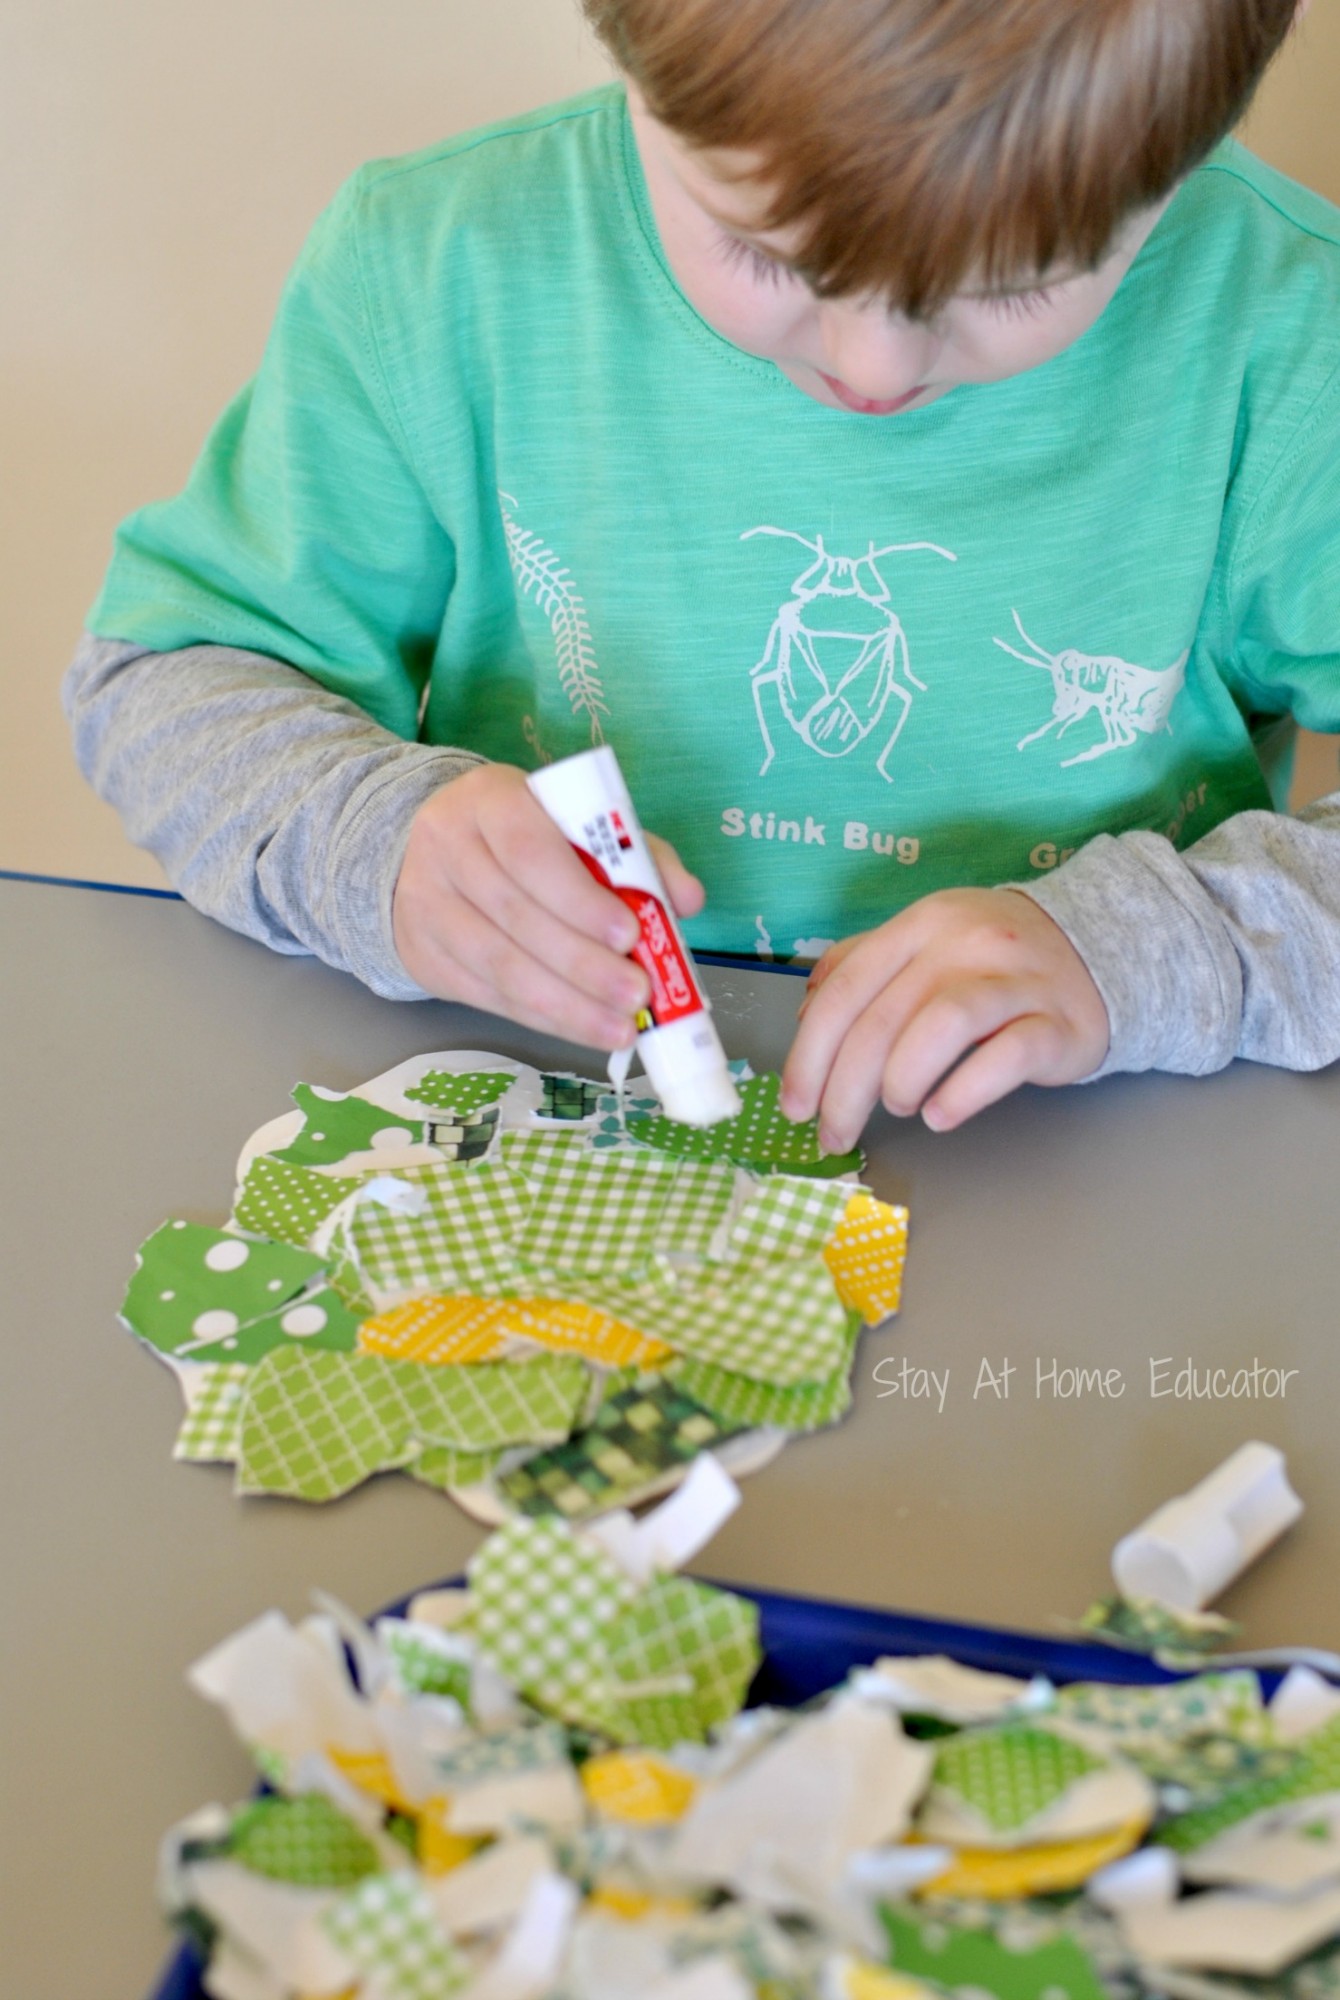 Shamrock craft for preschoolers - Stay At Home Educator